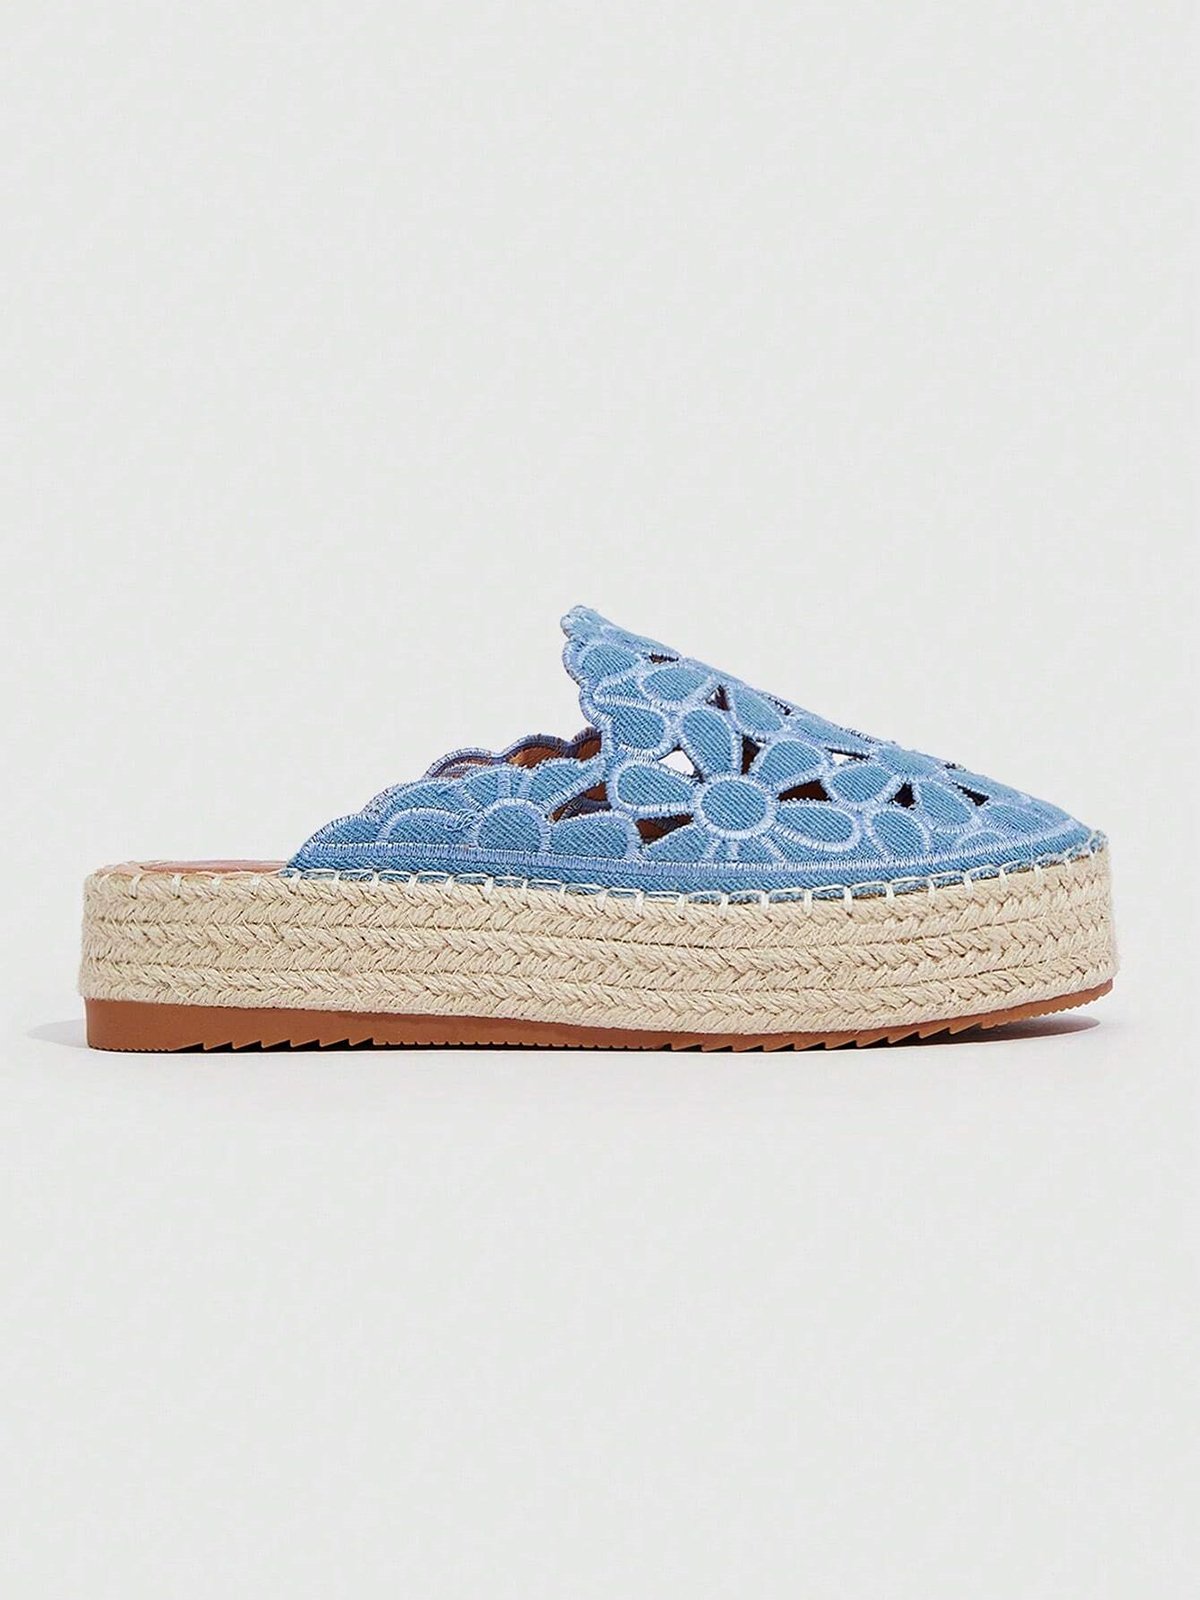 Hollow Out Floral Embroidered Platform Espadrille Mules